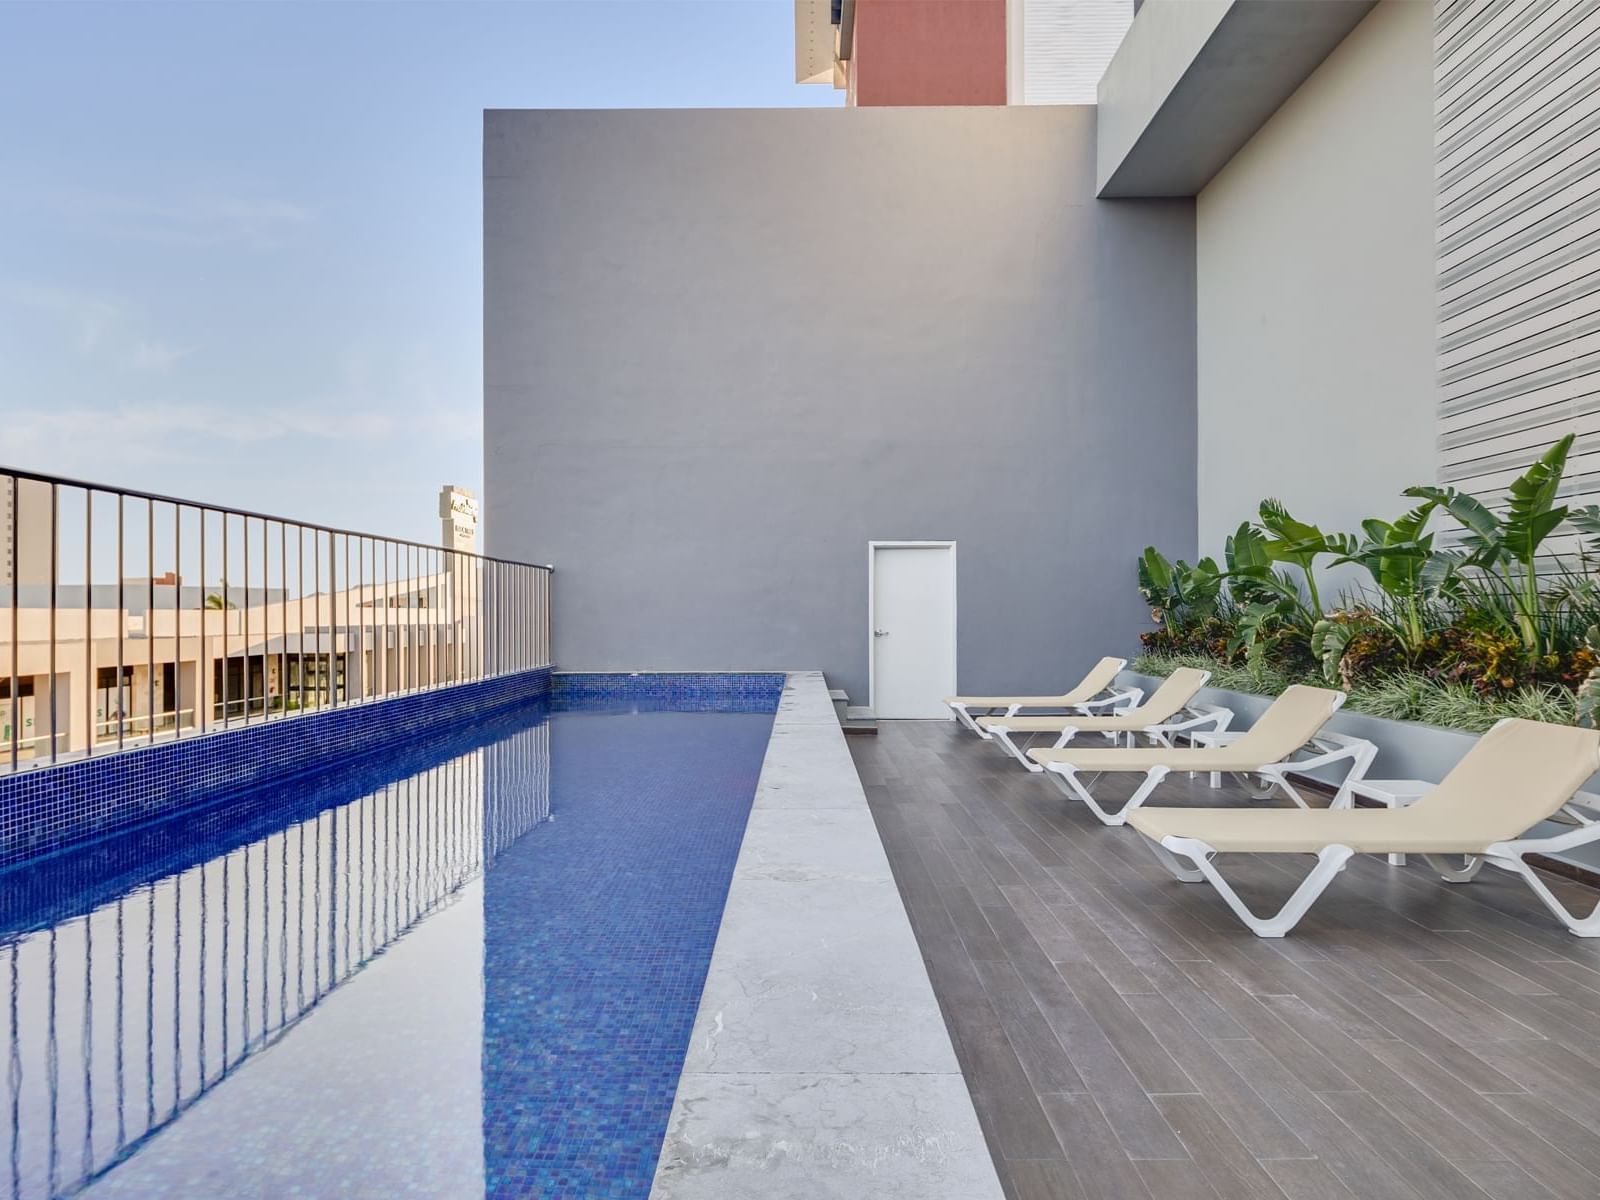 Outdoor pool with comfortable lounge chairs overlooking buildings at one Mazatlán